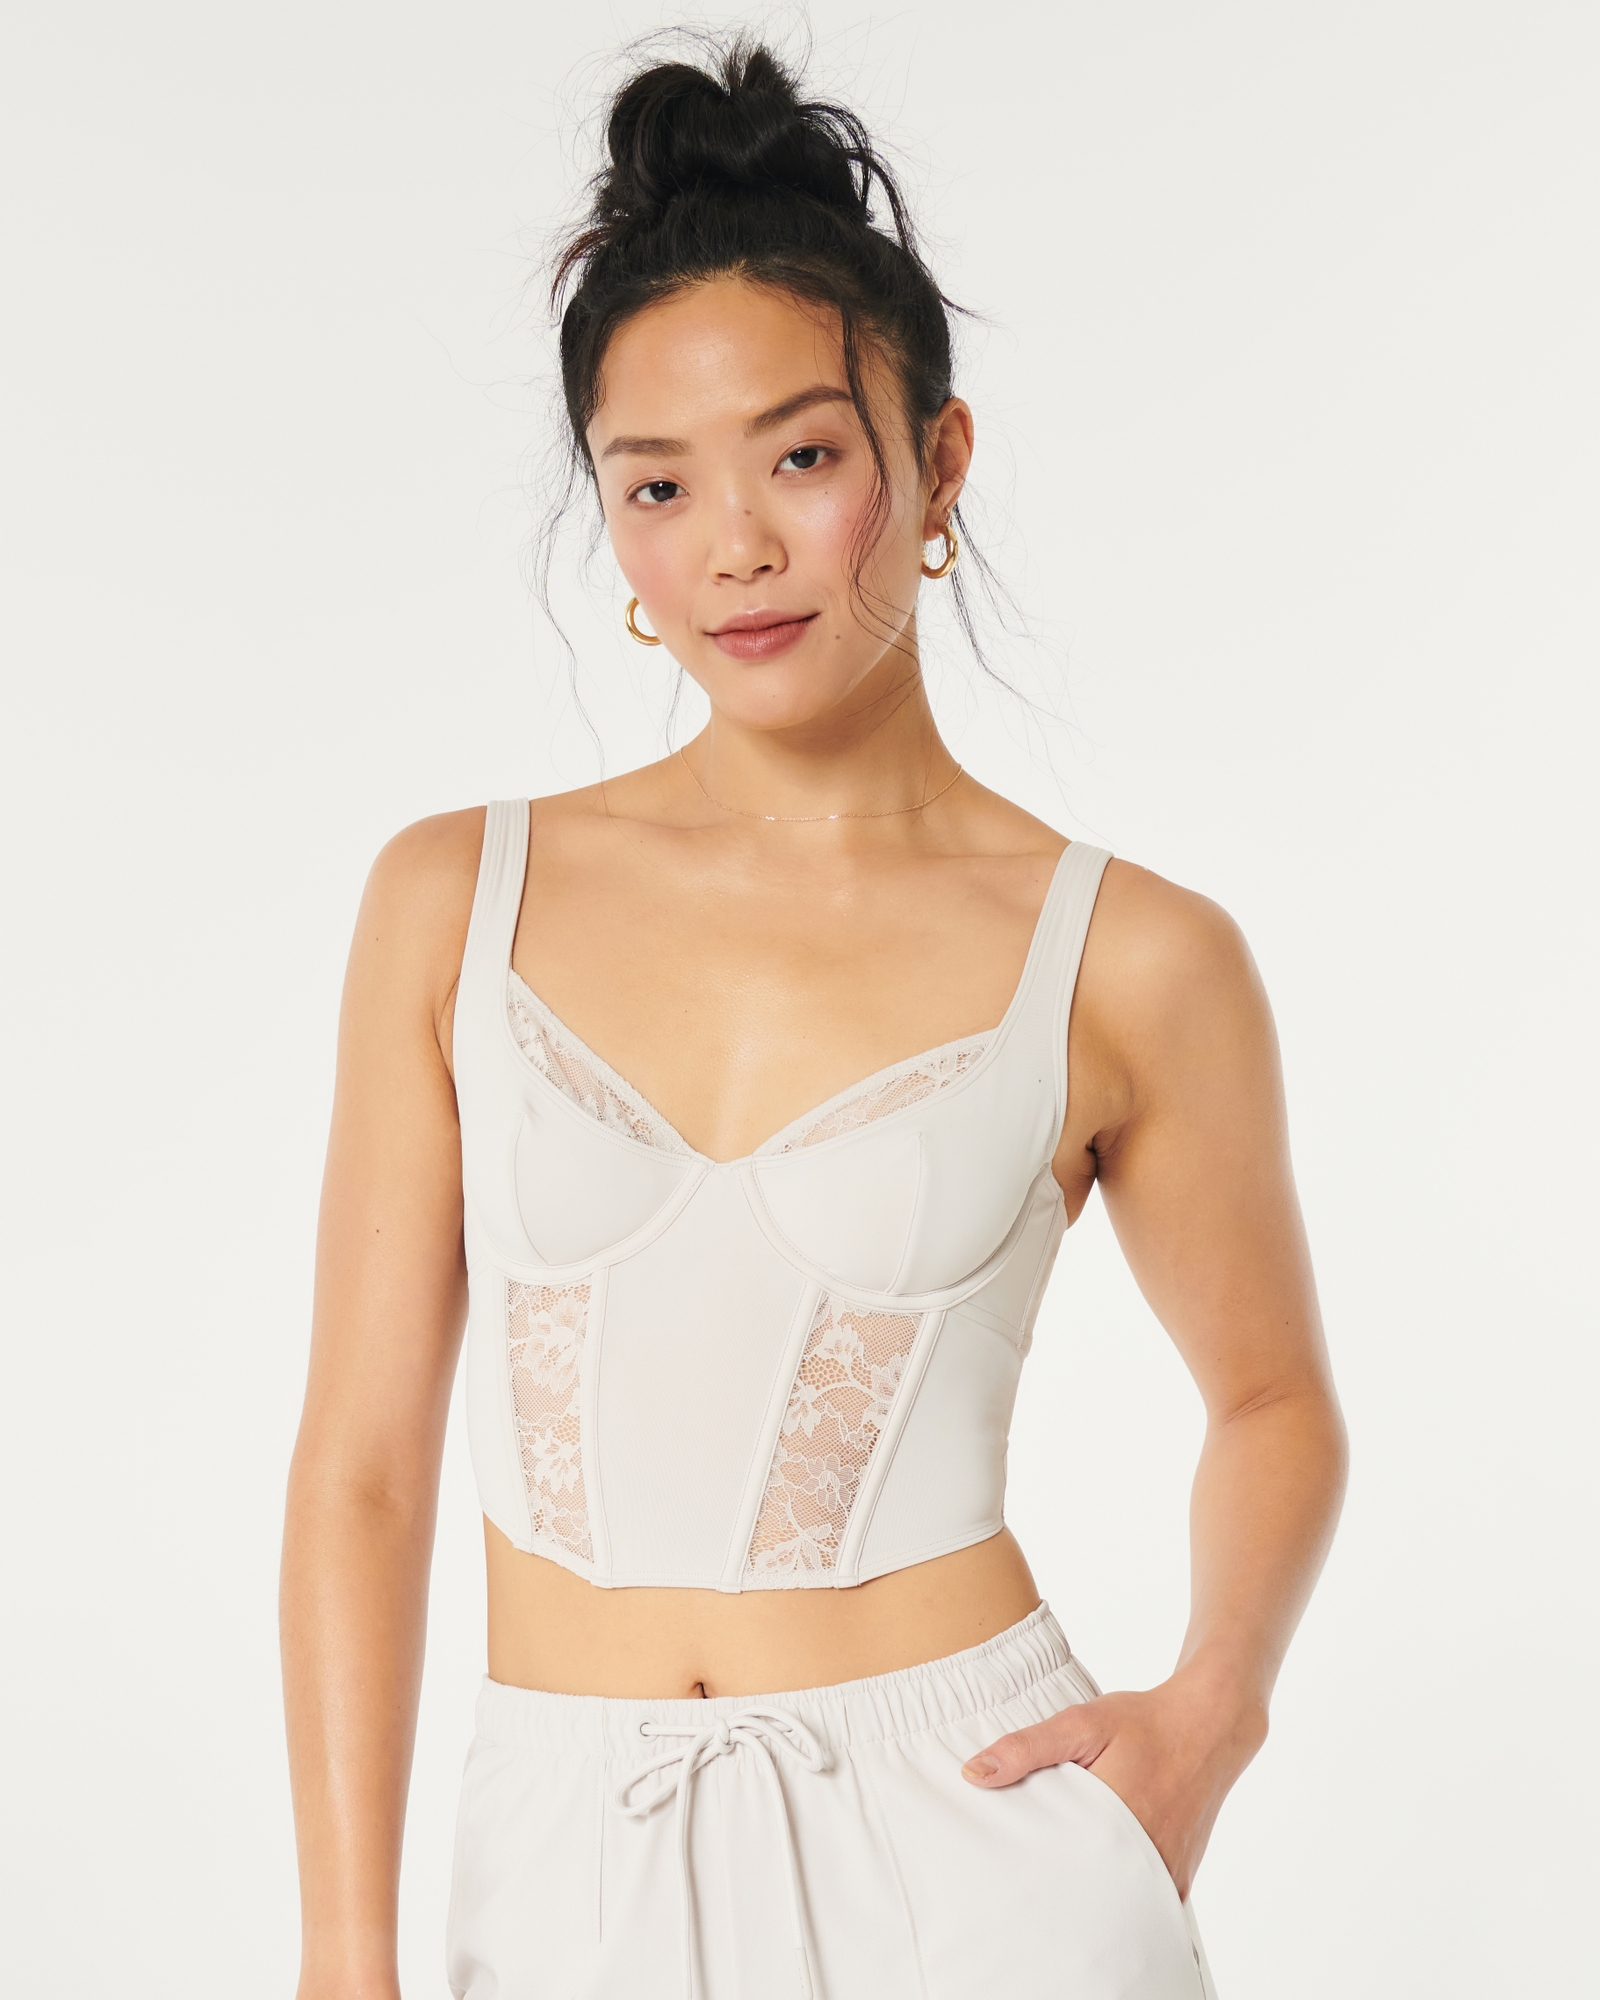 Hollister Gilly Hicks Satin Tie-Front Bustier